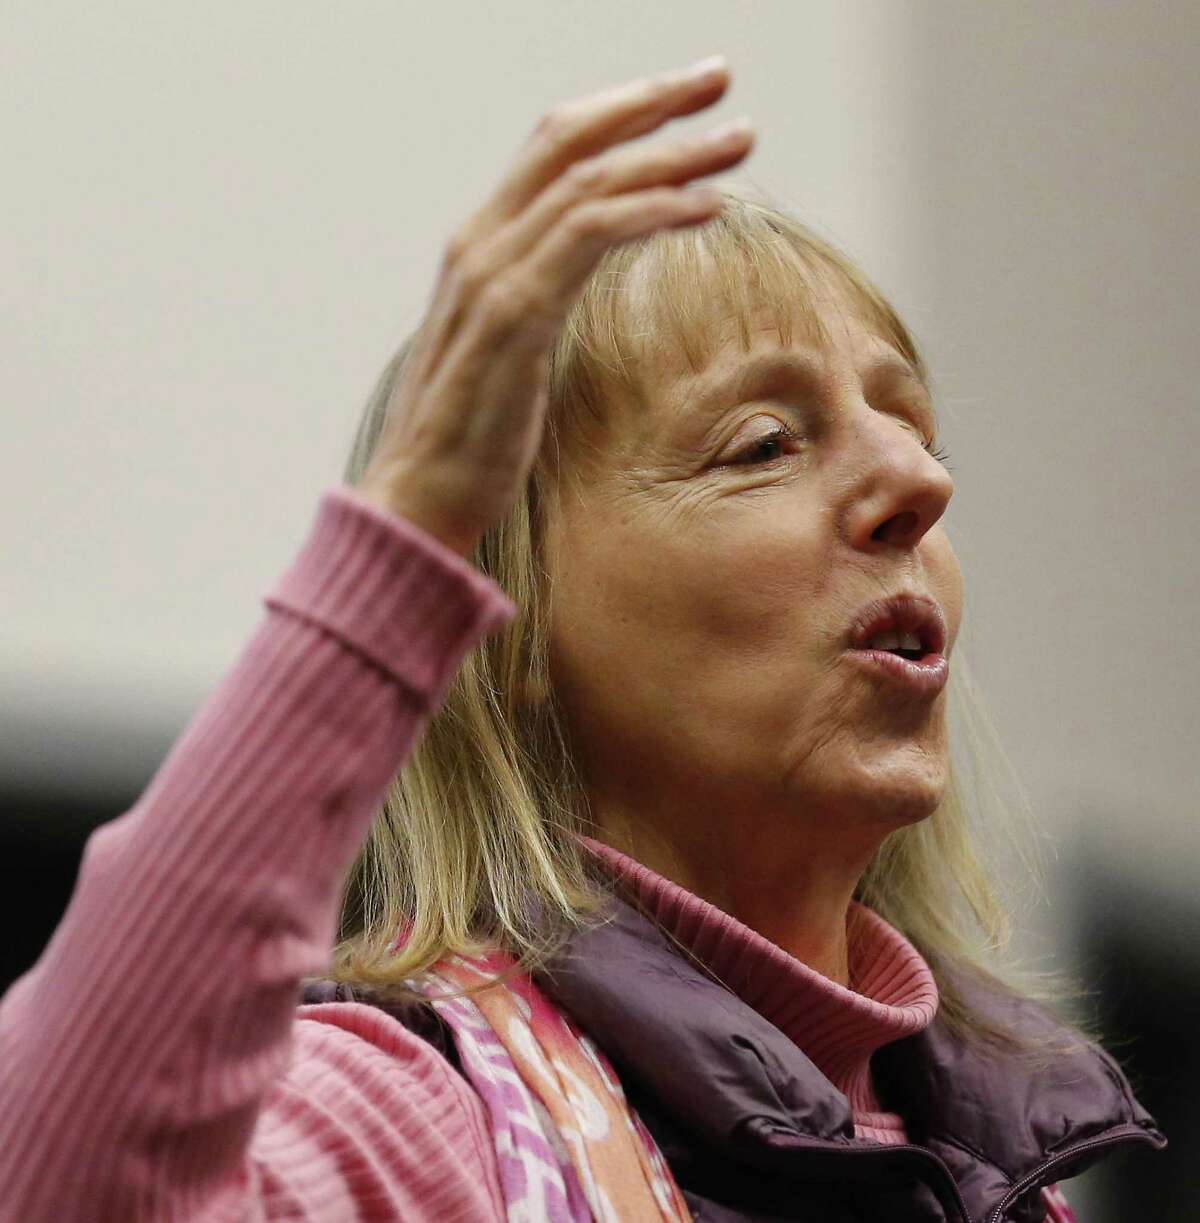 Medea Benjamin (pictured), co-founder of the women-led peace group CODEPINK and the international human rights group Global Exchange, and Ann Wright, a retired U.S. Army colonel and former diplomat who resigned from the U.S. State Department in protest of the invasion of Iraq, speak at the University of the Incarnate Word on Friday night about foreign policy in the Trump era. (Kin Man Hui/San Antonio Express-News)